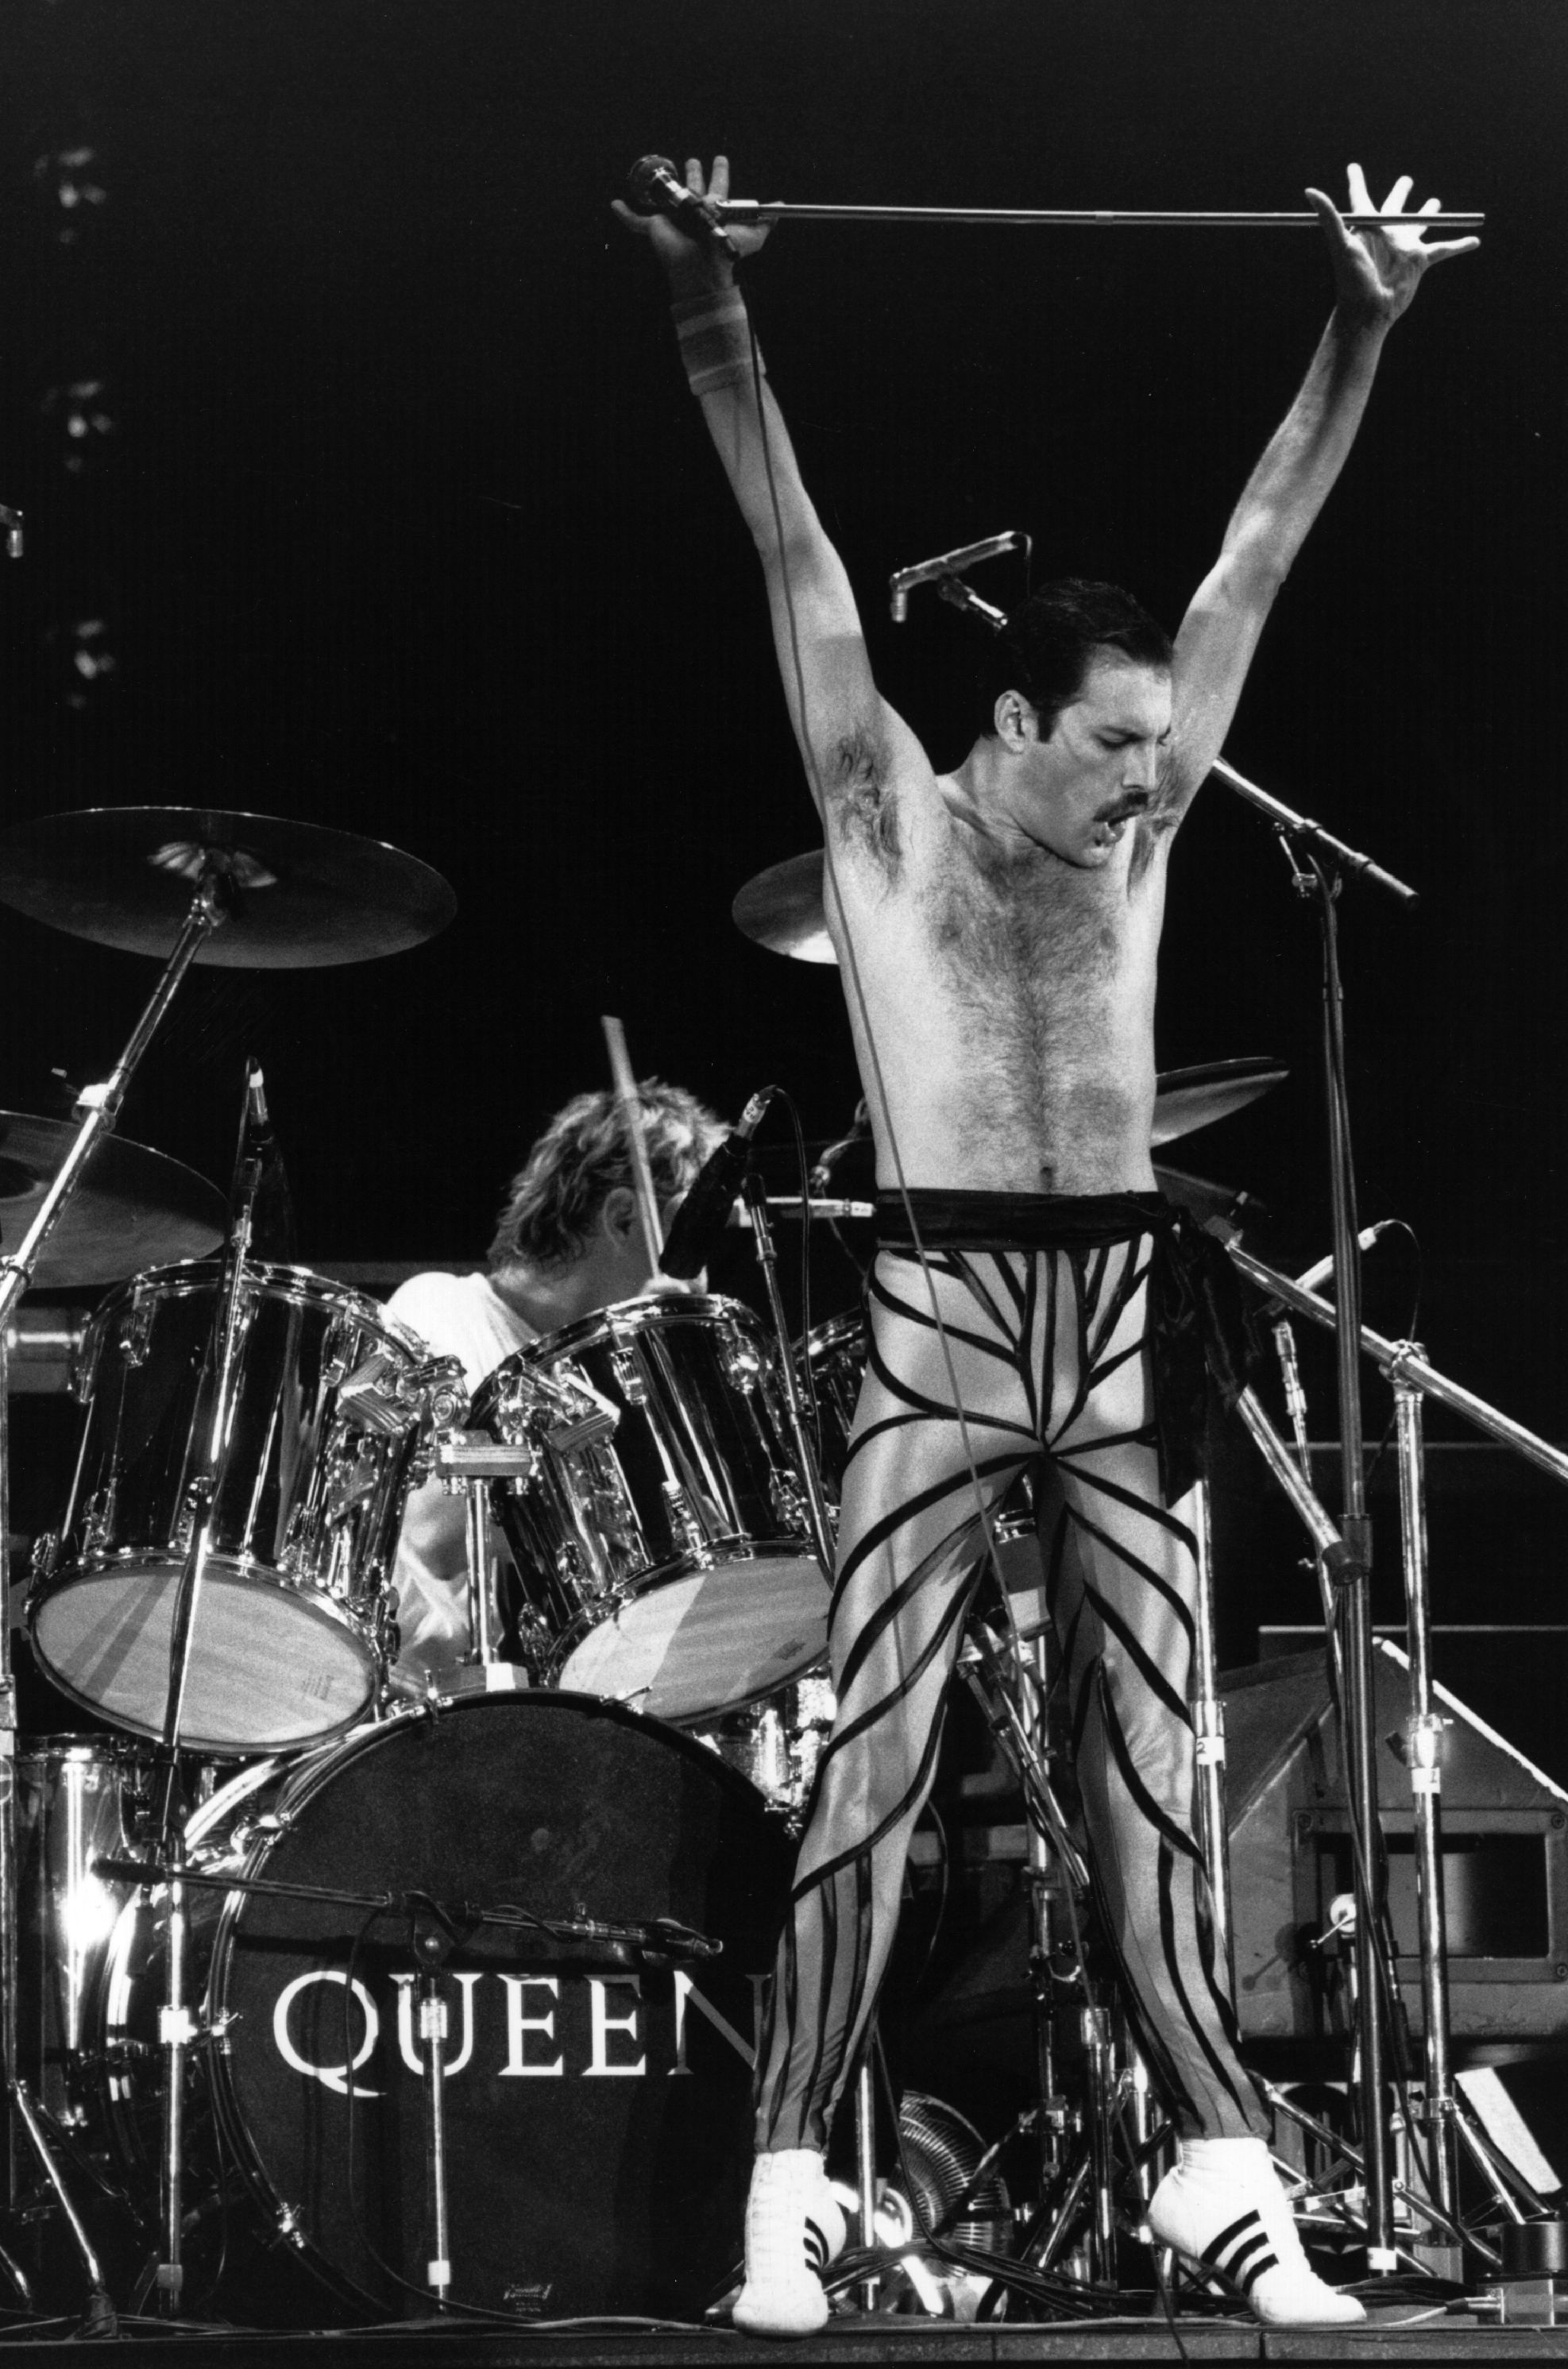 British stadium rock group Queen on stage, with lead singer Freddie Mercury (Frederick Bulsara, 1946 - 1991) in the foreground. Original Publication: People Disc - HU0462 (Photo by Express Newspapers/Getty Images)